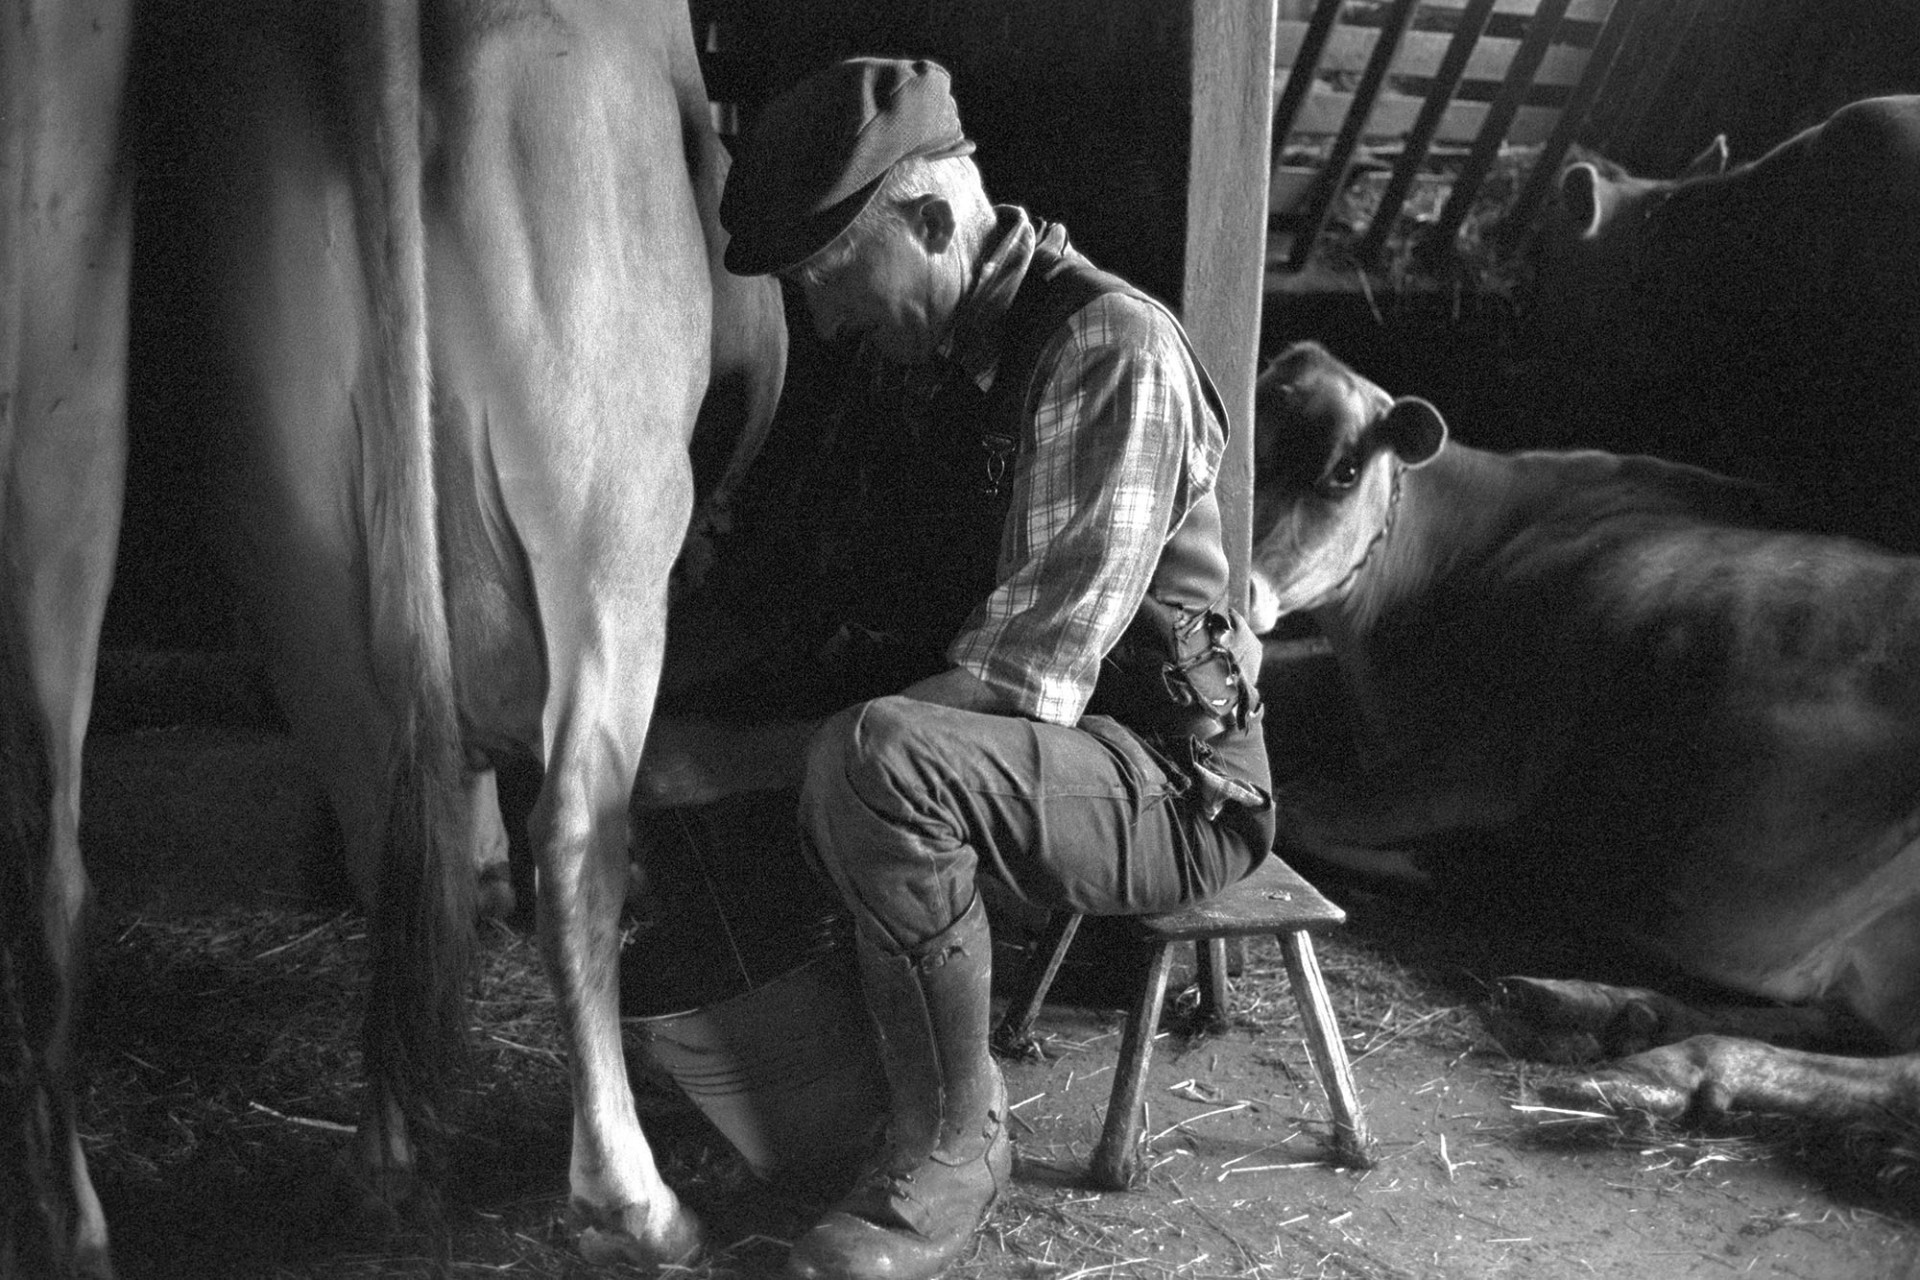 Farmer milking cow by hand.
[Gordon Sanders sitting on a stool milking a cow by hand, at Reynards Park, Ashreigney. Two other cows are in the next stall in the milking parlour.]